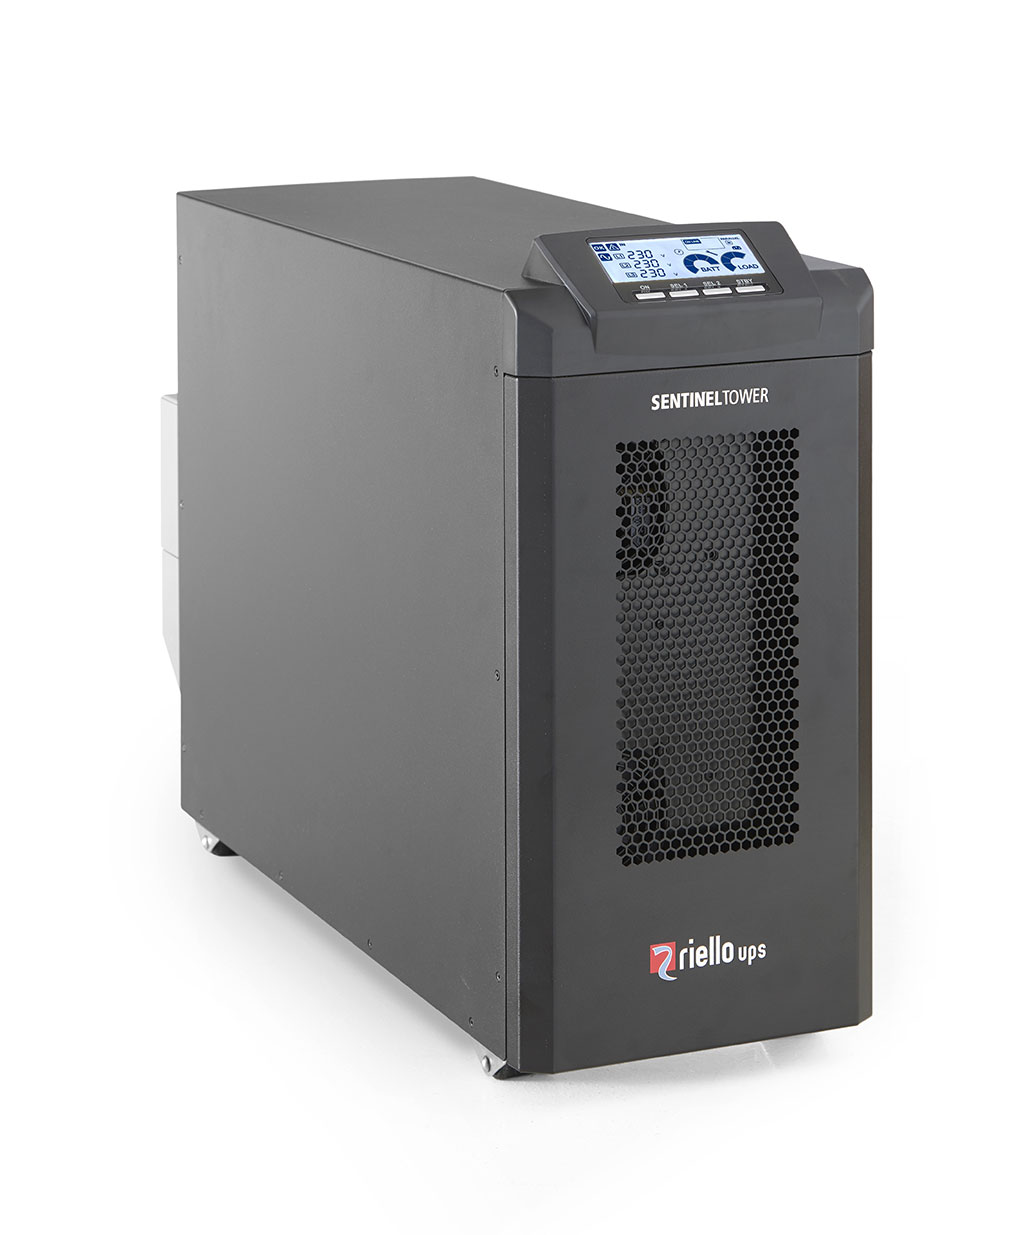 Riello STW 10000, Sentinel Tower, online double conversion, 10 KVA 1/1, 3/1, 400/230 Vac, 50Hz, UPS system